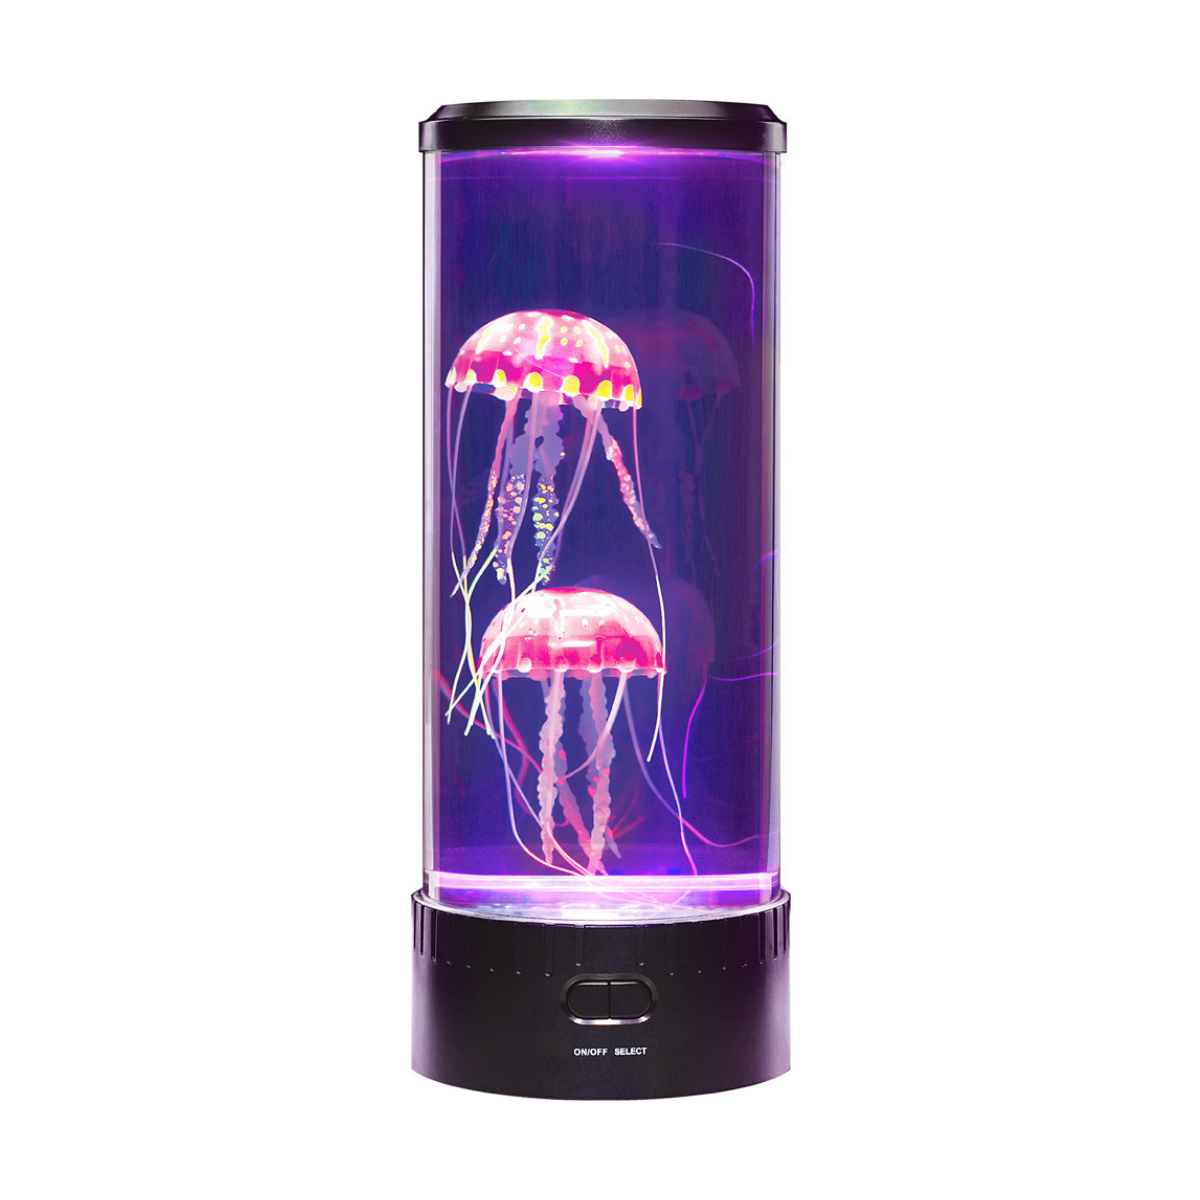 Electric Jellyfish Mood Light - Plugs In (Dimensions: 14"High x 5"Round)